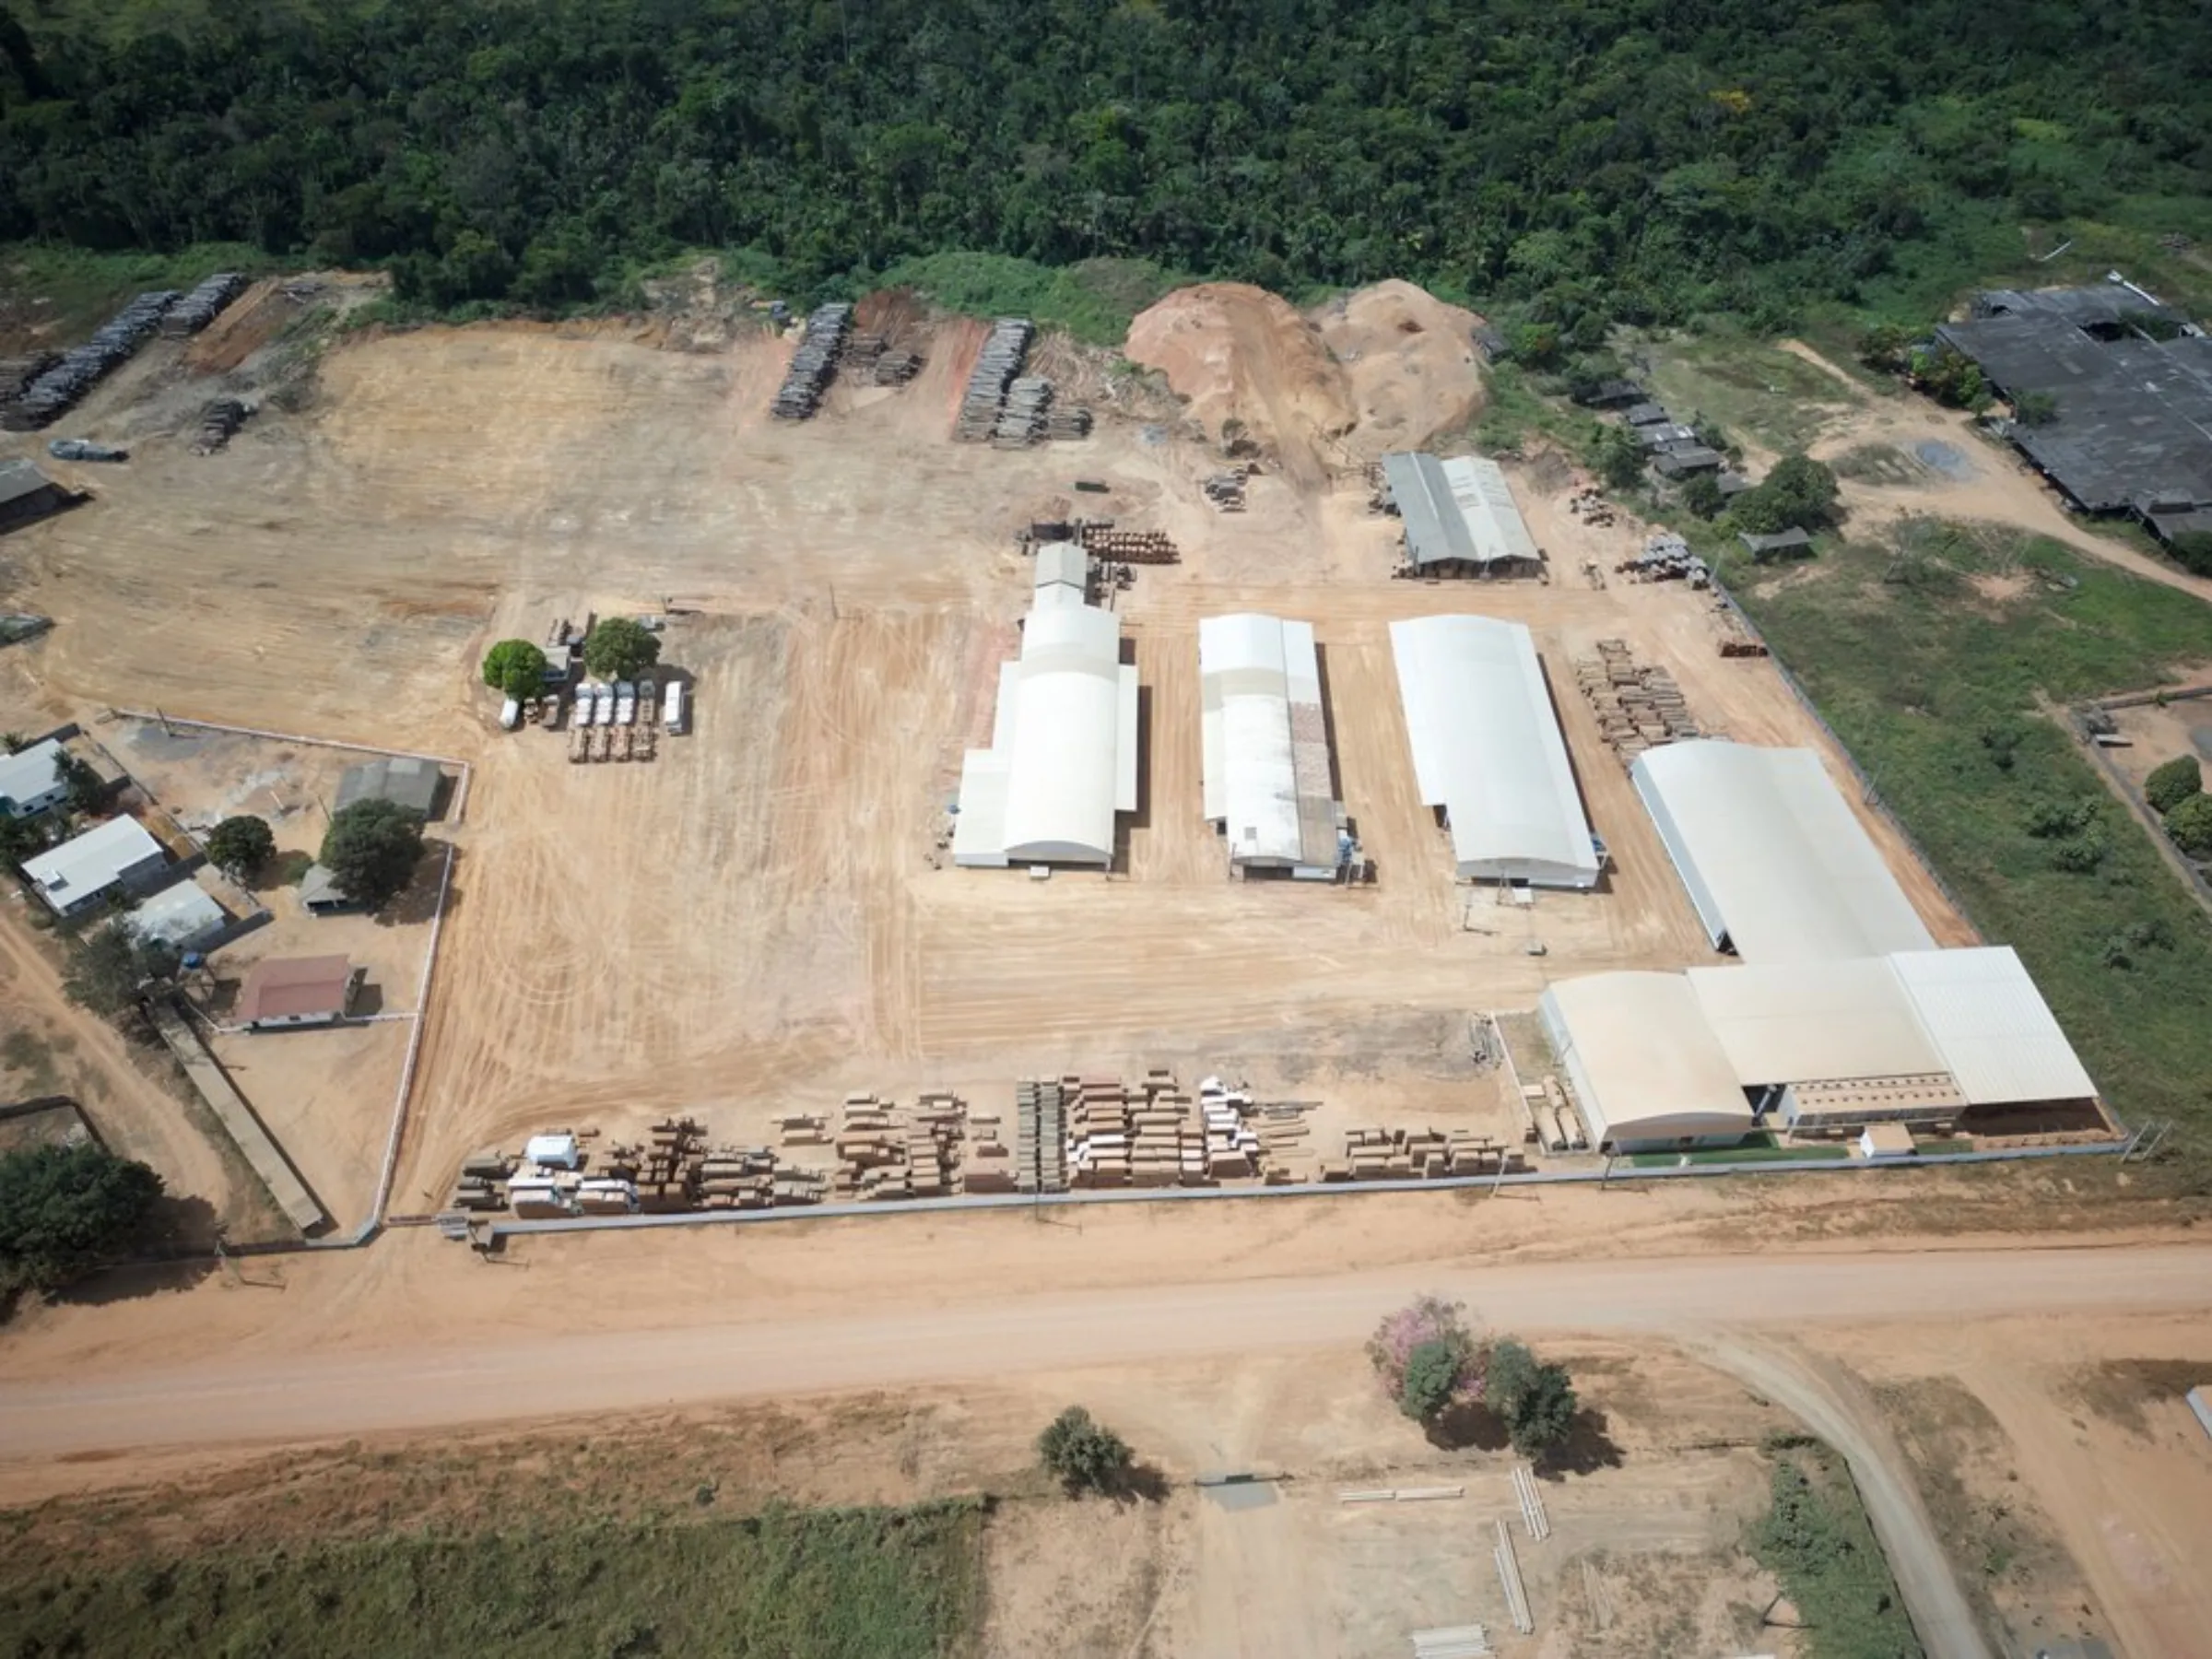 A logging company in Colniza that is linked to Florestal Santa Maria, a conservation project in the state of Mato Grosso, Brazil, May 28, 2022